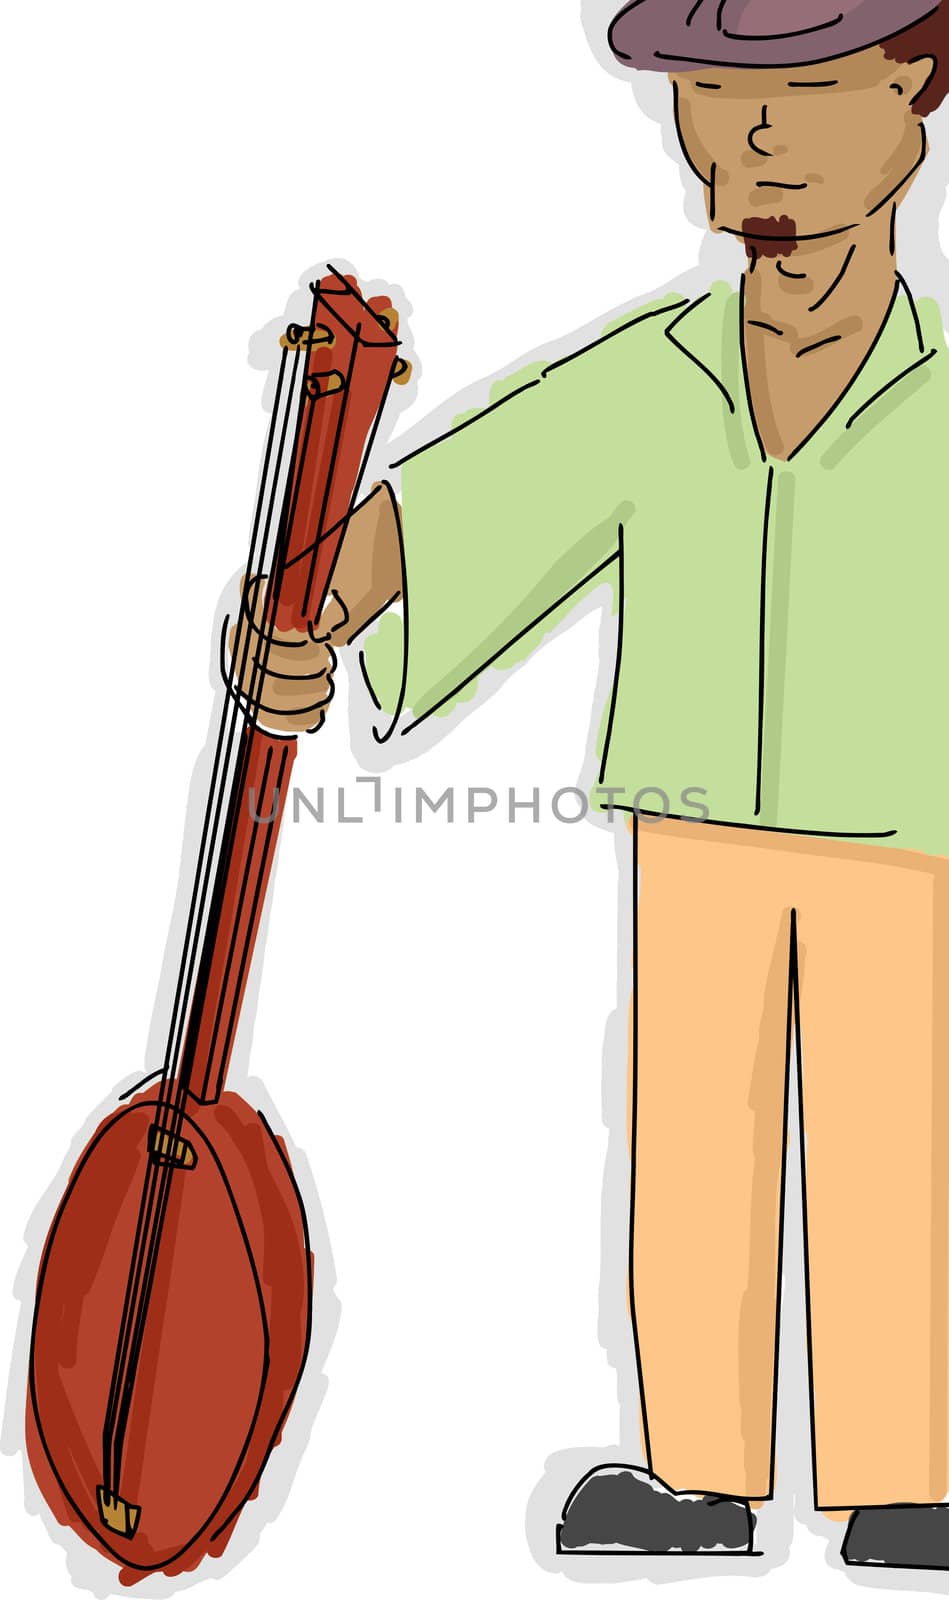 Man in hat holds a banjo over white background